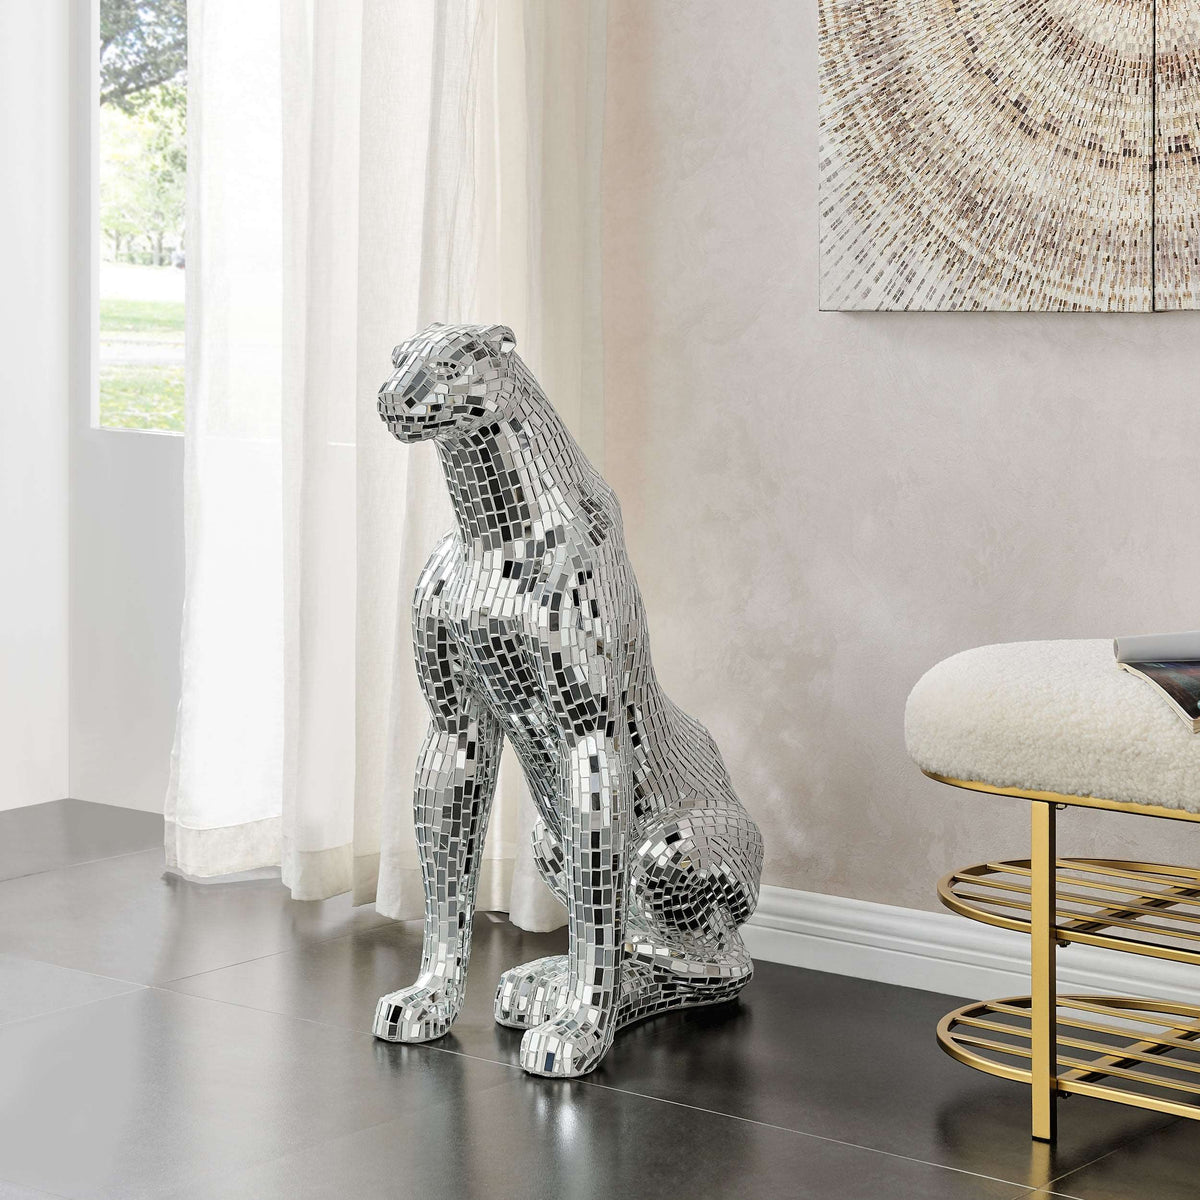 Boli Sitting Panther Sculpture / Glass and Chrome / Modern Floor Statue